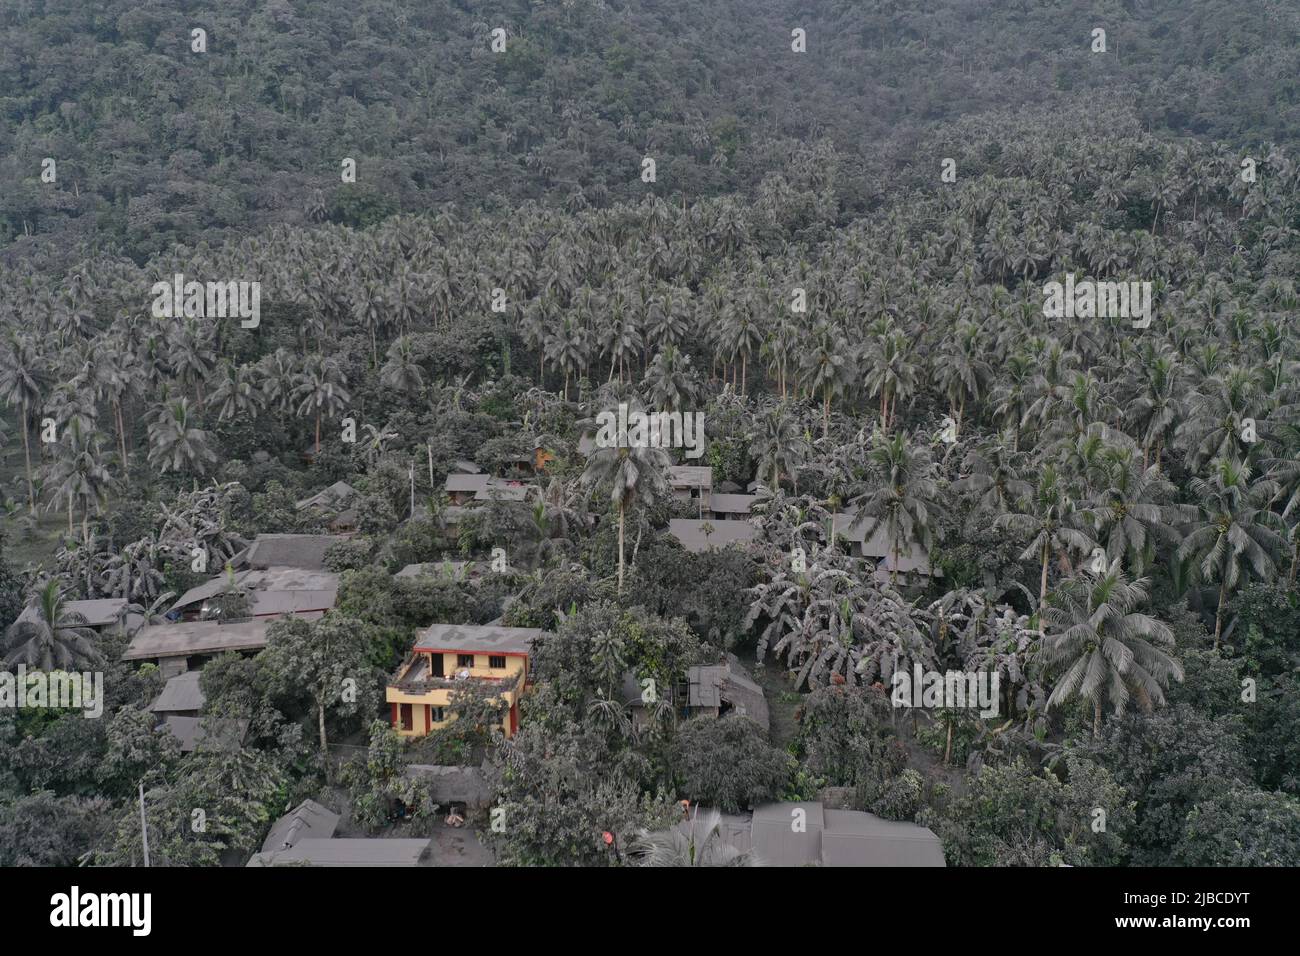 Bulusan, Philippines. 5th June 2022. (220605) -- SORSOGON PROVINCE, June 5, 2022 (Xinhua) -- Aerial photo shows an ash-covered town after the phreatic eruption of Bulusan volcano in Sorsogon Province, the Philippines on June 5, 2022. The Philippine Institute of Volcanology and Seismology on Sunday raised the alert level for Bulusan volcano from zero to one after the volcano in Sorsogon province, southeast of Manila, spewed a grey plume about a kilometer high into the sky. (Sorsogon Provincial Information Office/Handout via Xinhua) Credit: Xinhua/Alamy Live News Stock Photo